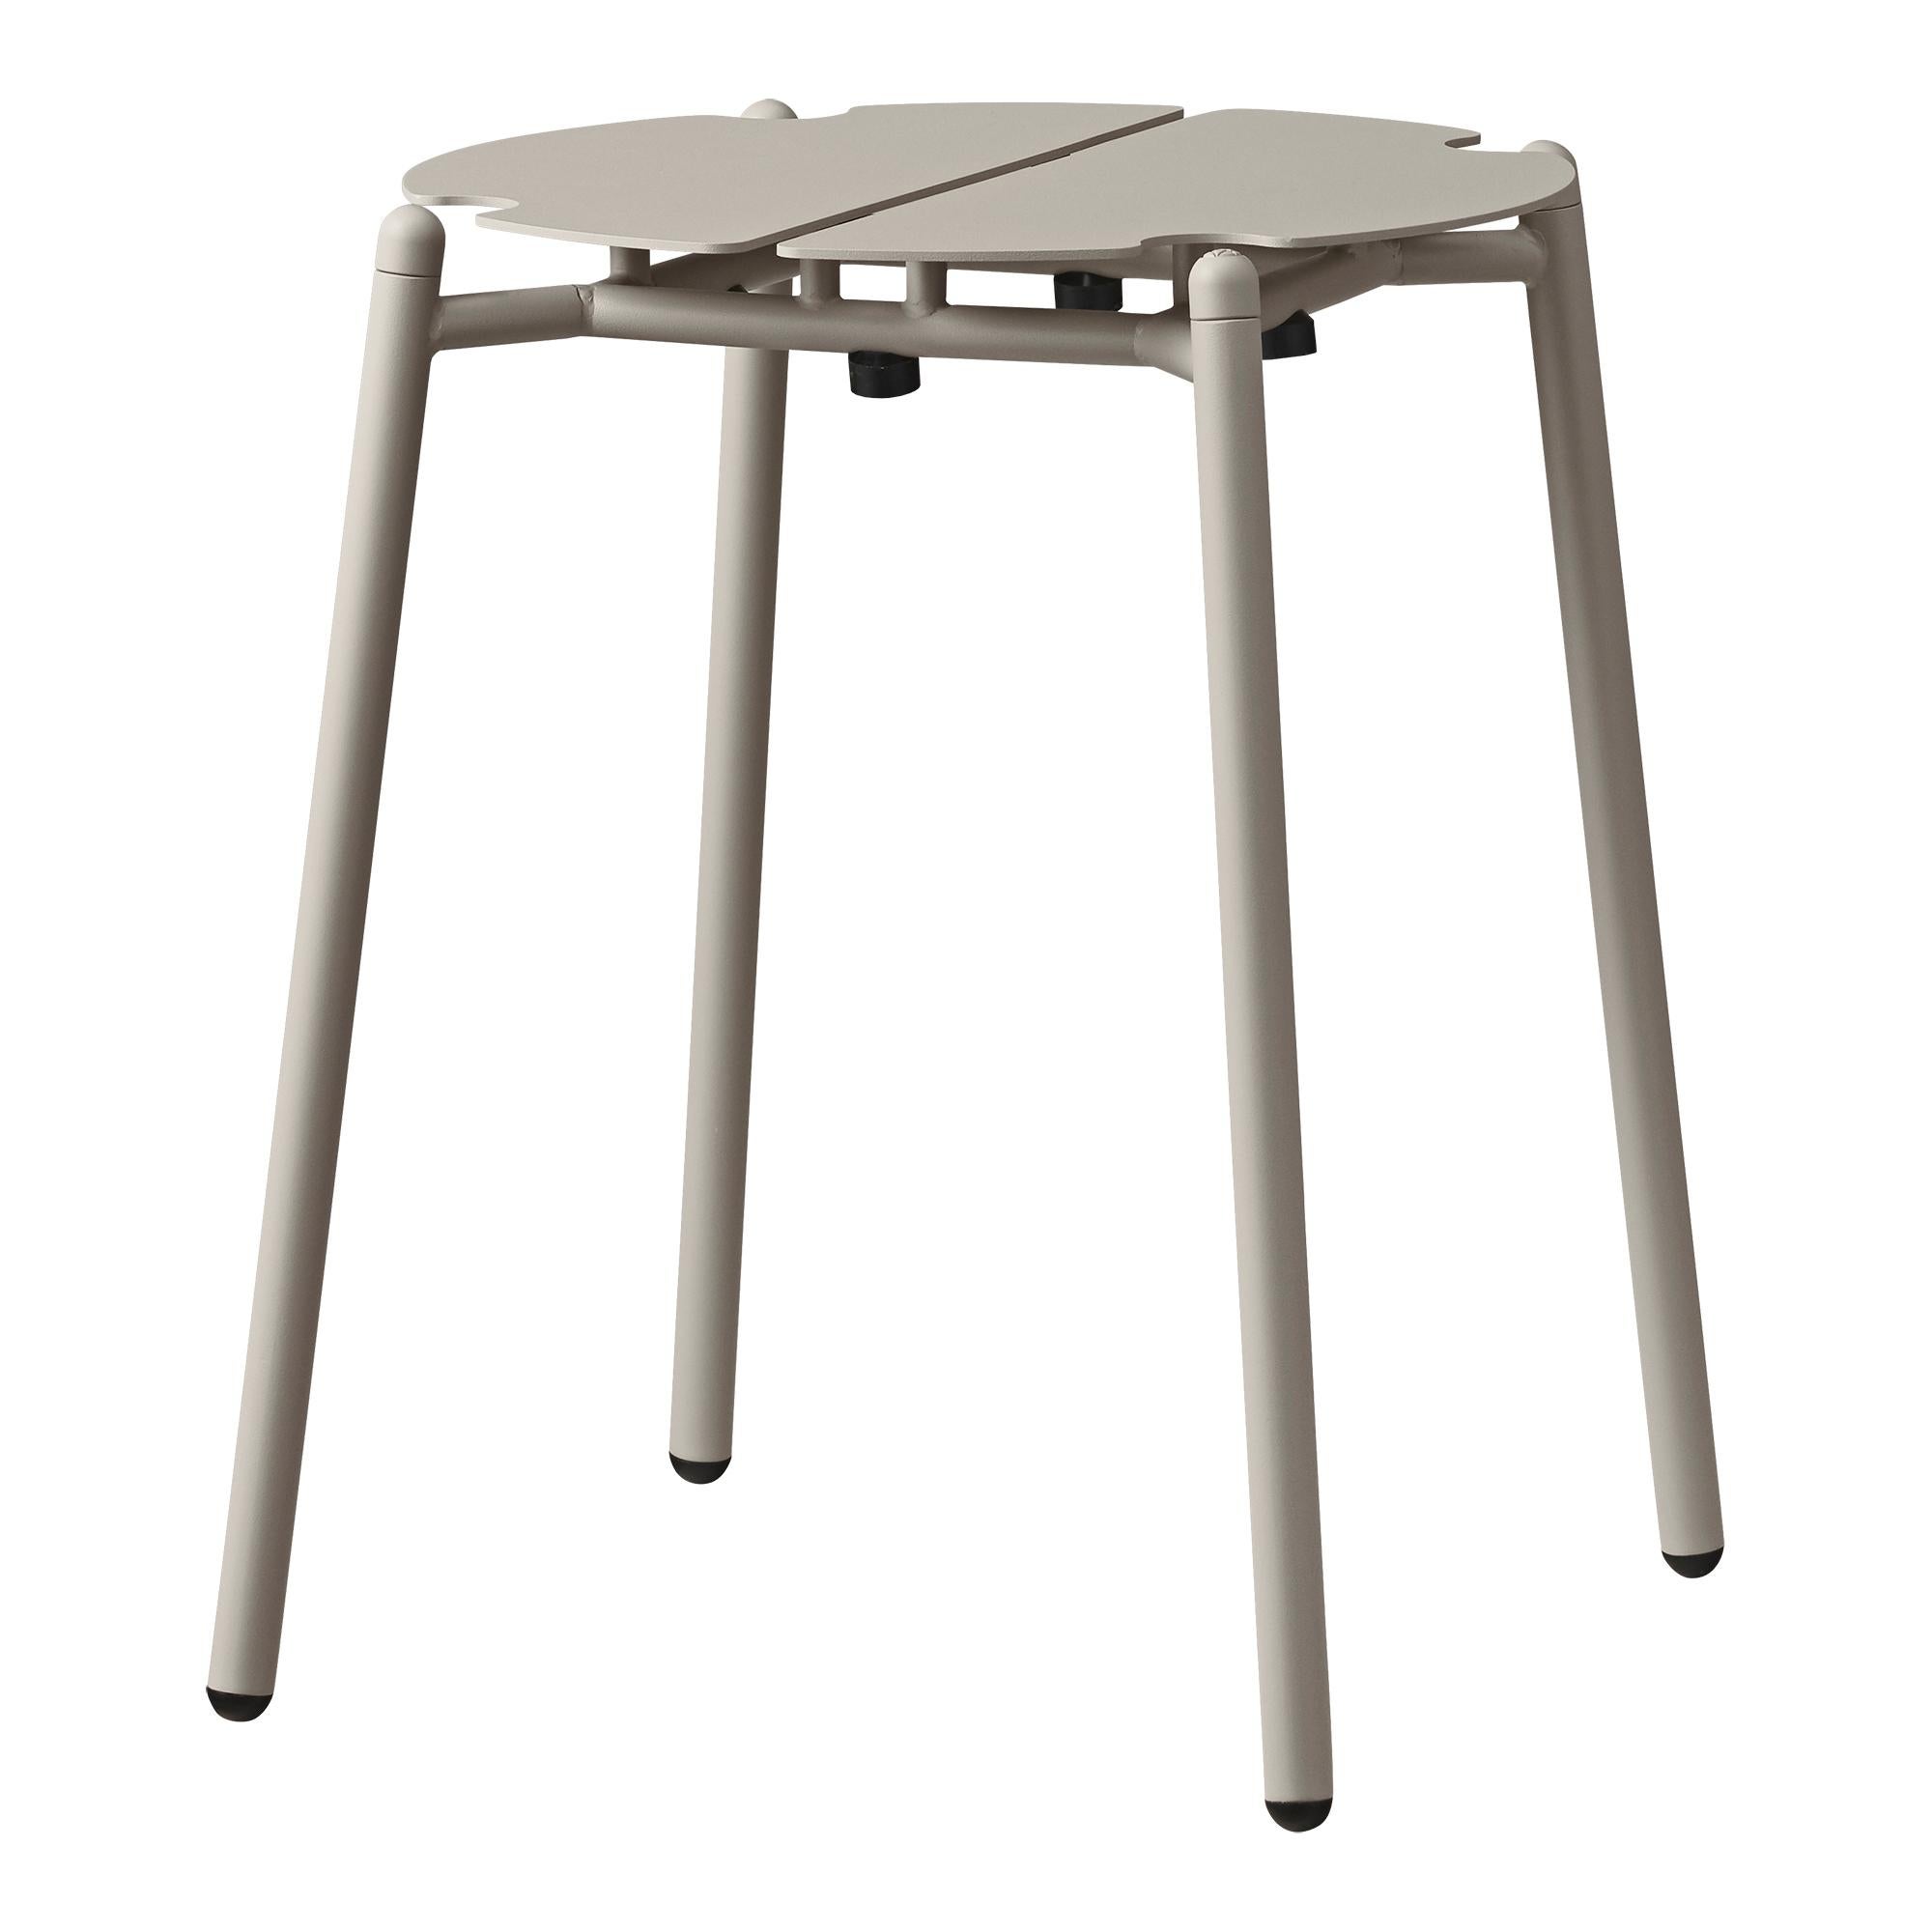 Taupe minimalist stool
Dimensions: Diameter 35 x height 45 cm 
Materials: Steel w. Matte powder coating & aluminum w. Matte powder coating.
Available in colors: Taupe, bordeaux, forest, ginger bread, black and, black and gold.


The NOVO